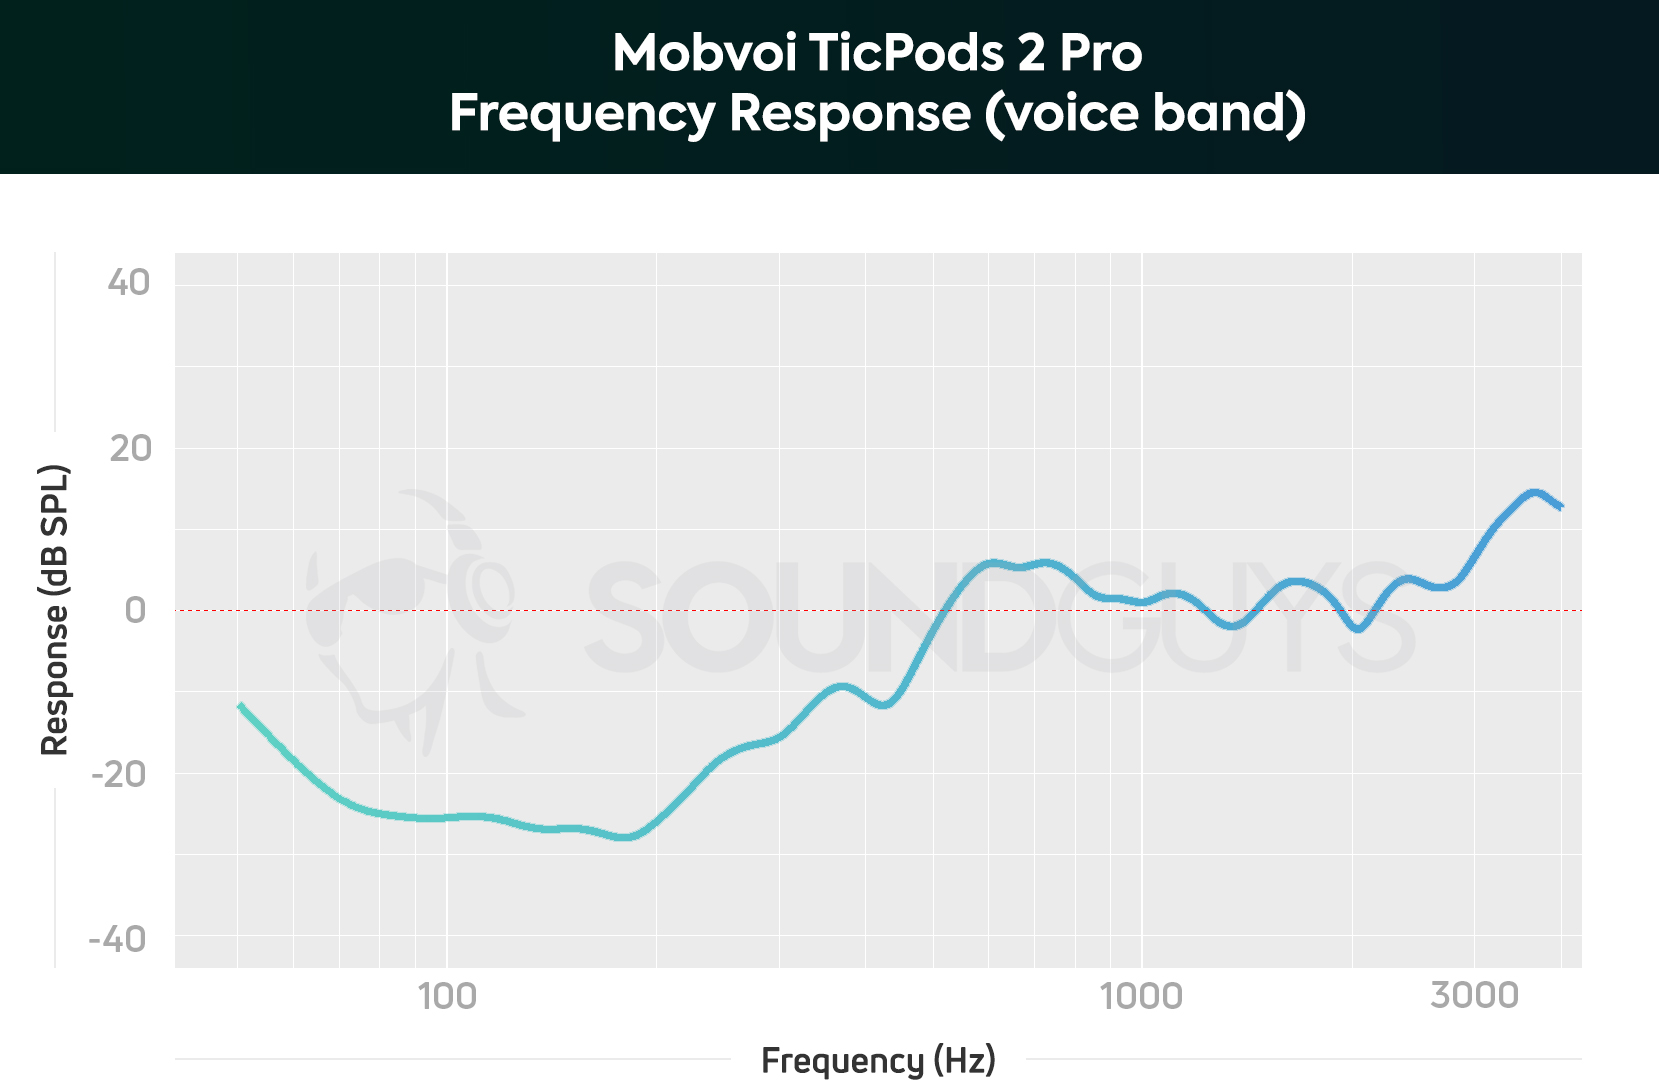 A chart depicting the Mobvoi TicPods 2 Pro microphone frequency response.